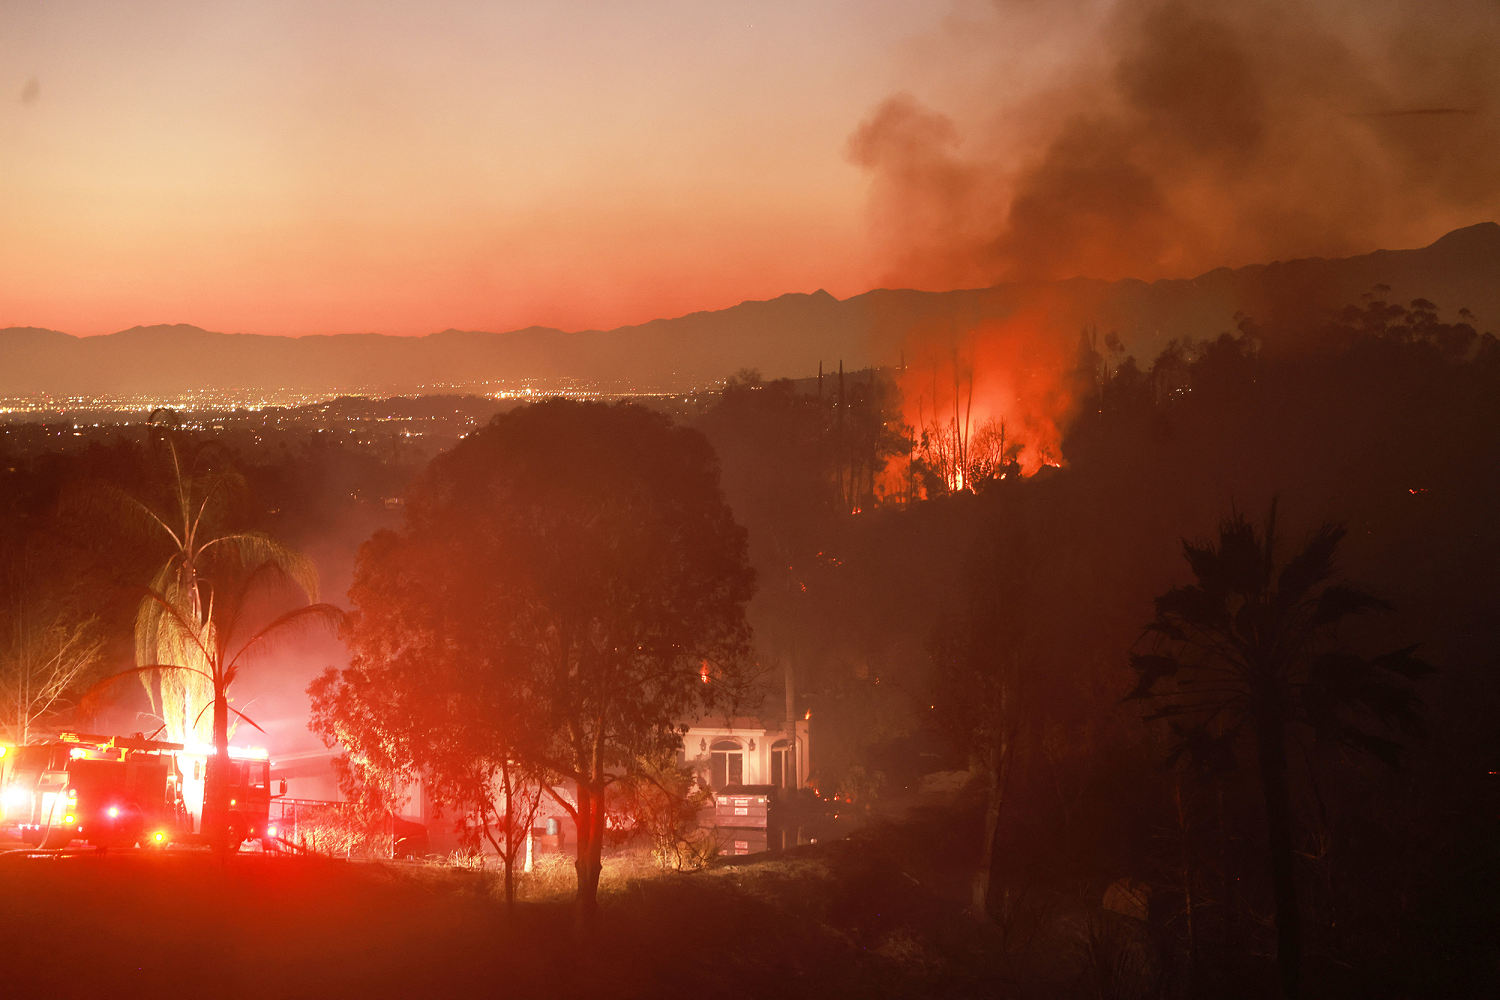 Western wildfires destroy homes, pollute air amid persisting heat waves